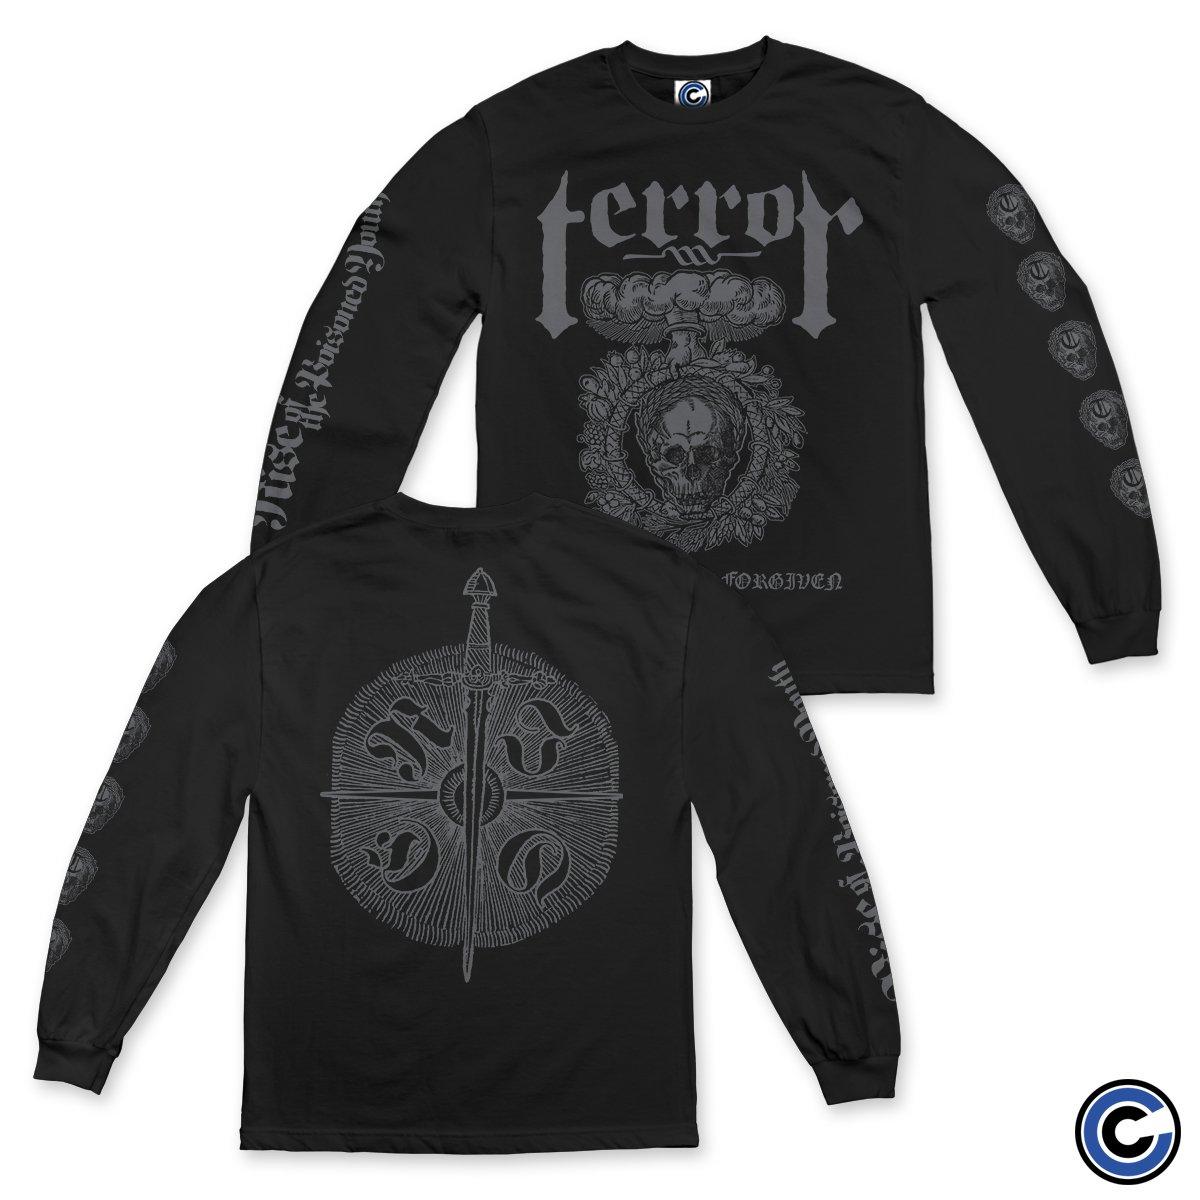 Buy – Terror "Poisoned Youth" Long Sleeve – Band & Music Merch – Cold Cuts Merch